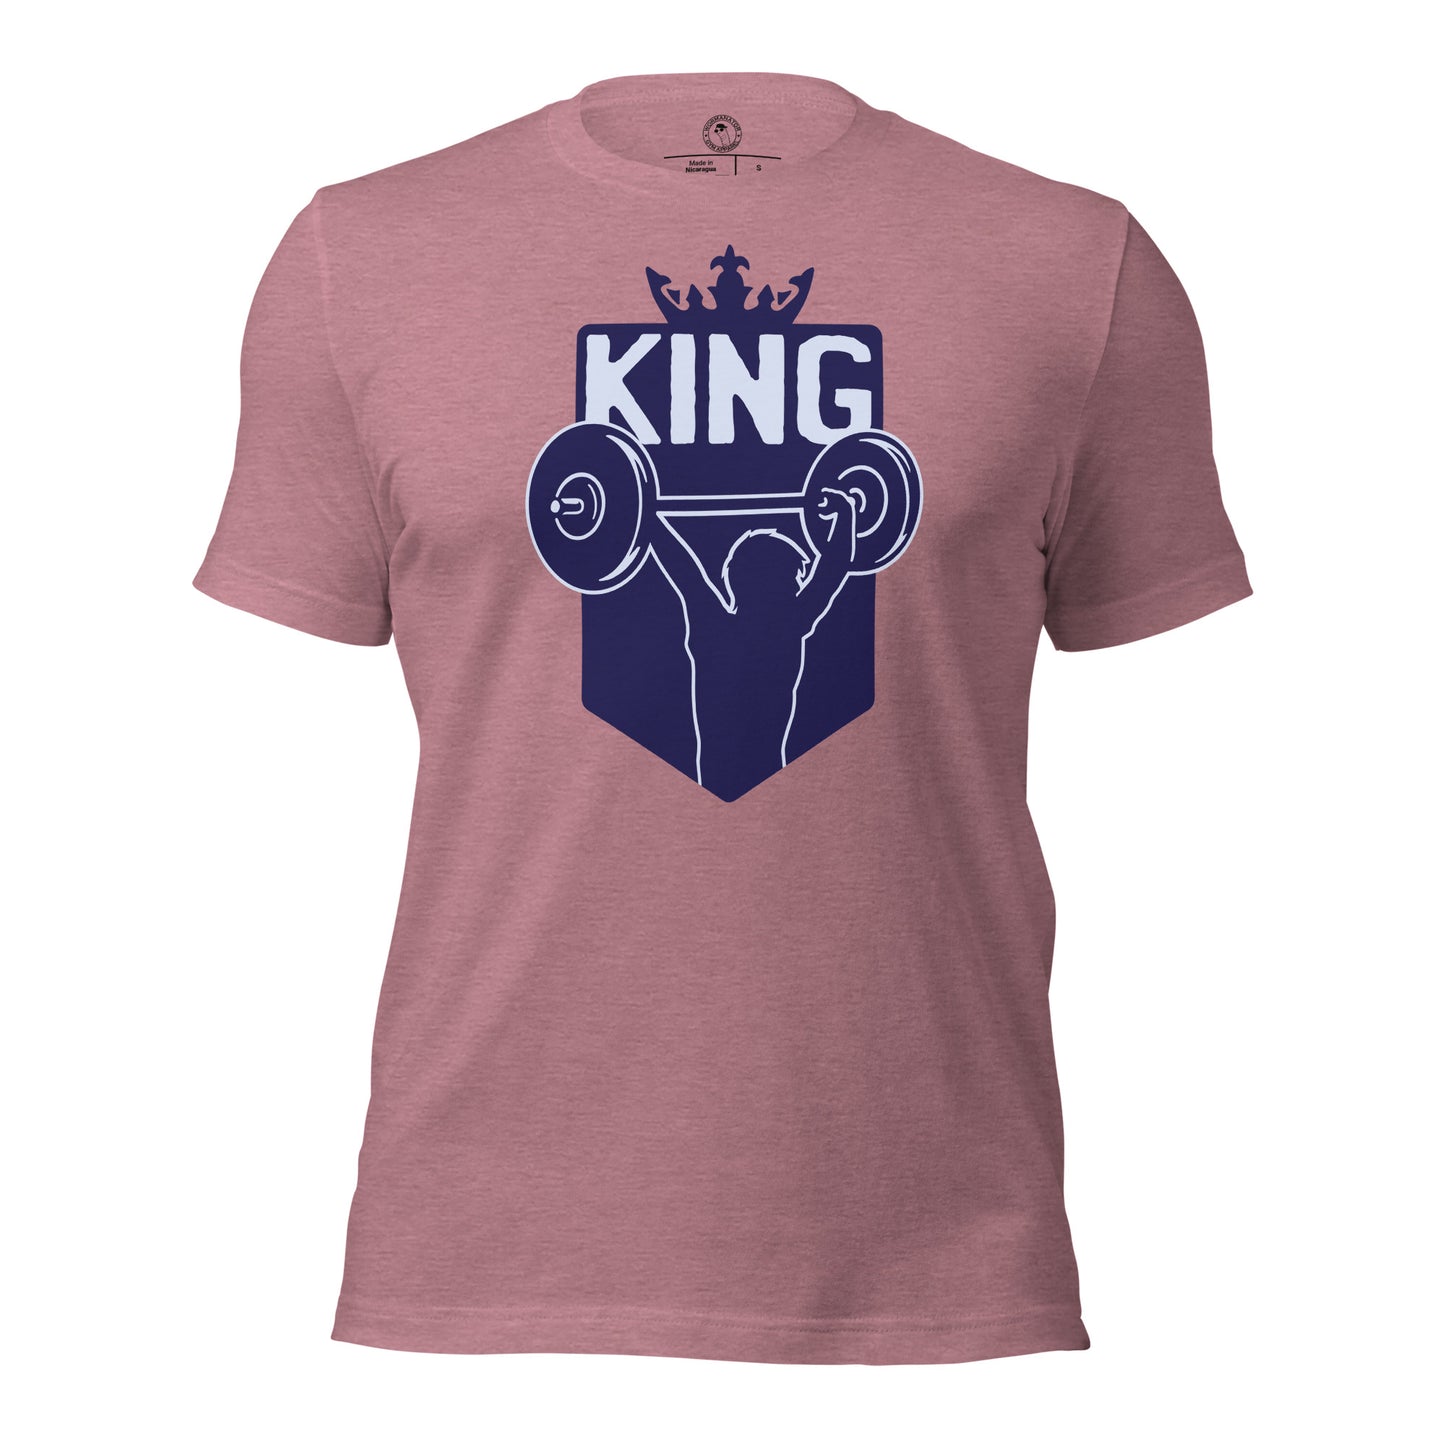 Gym King Shirt in Heather Orchid